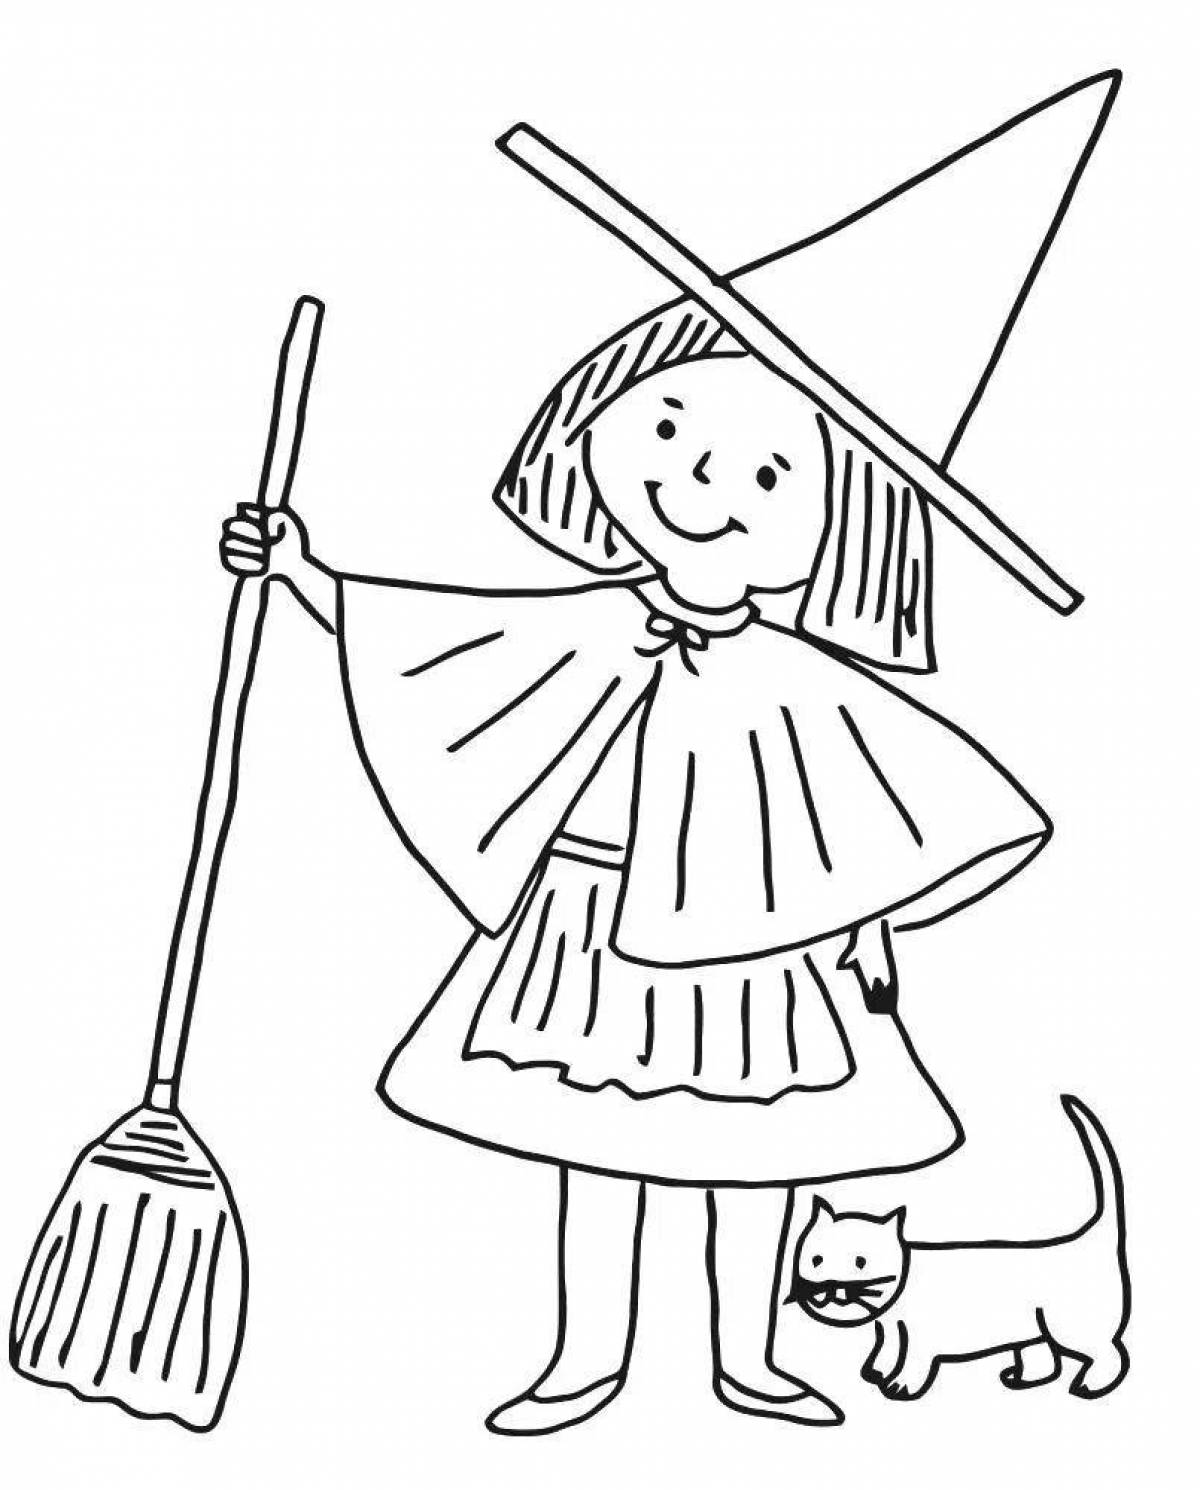 Dark witch coloring book